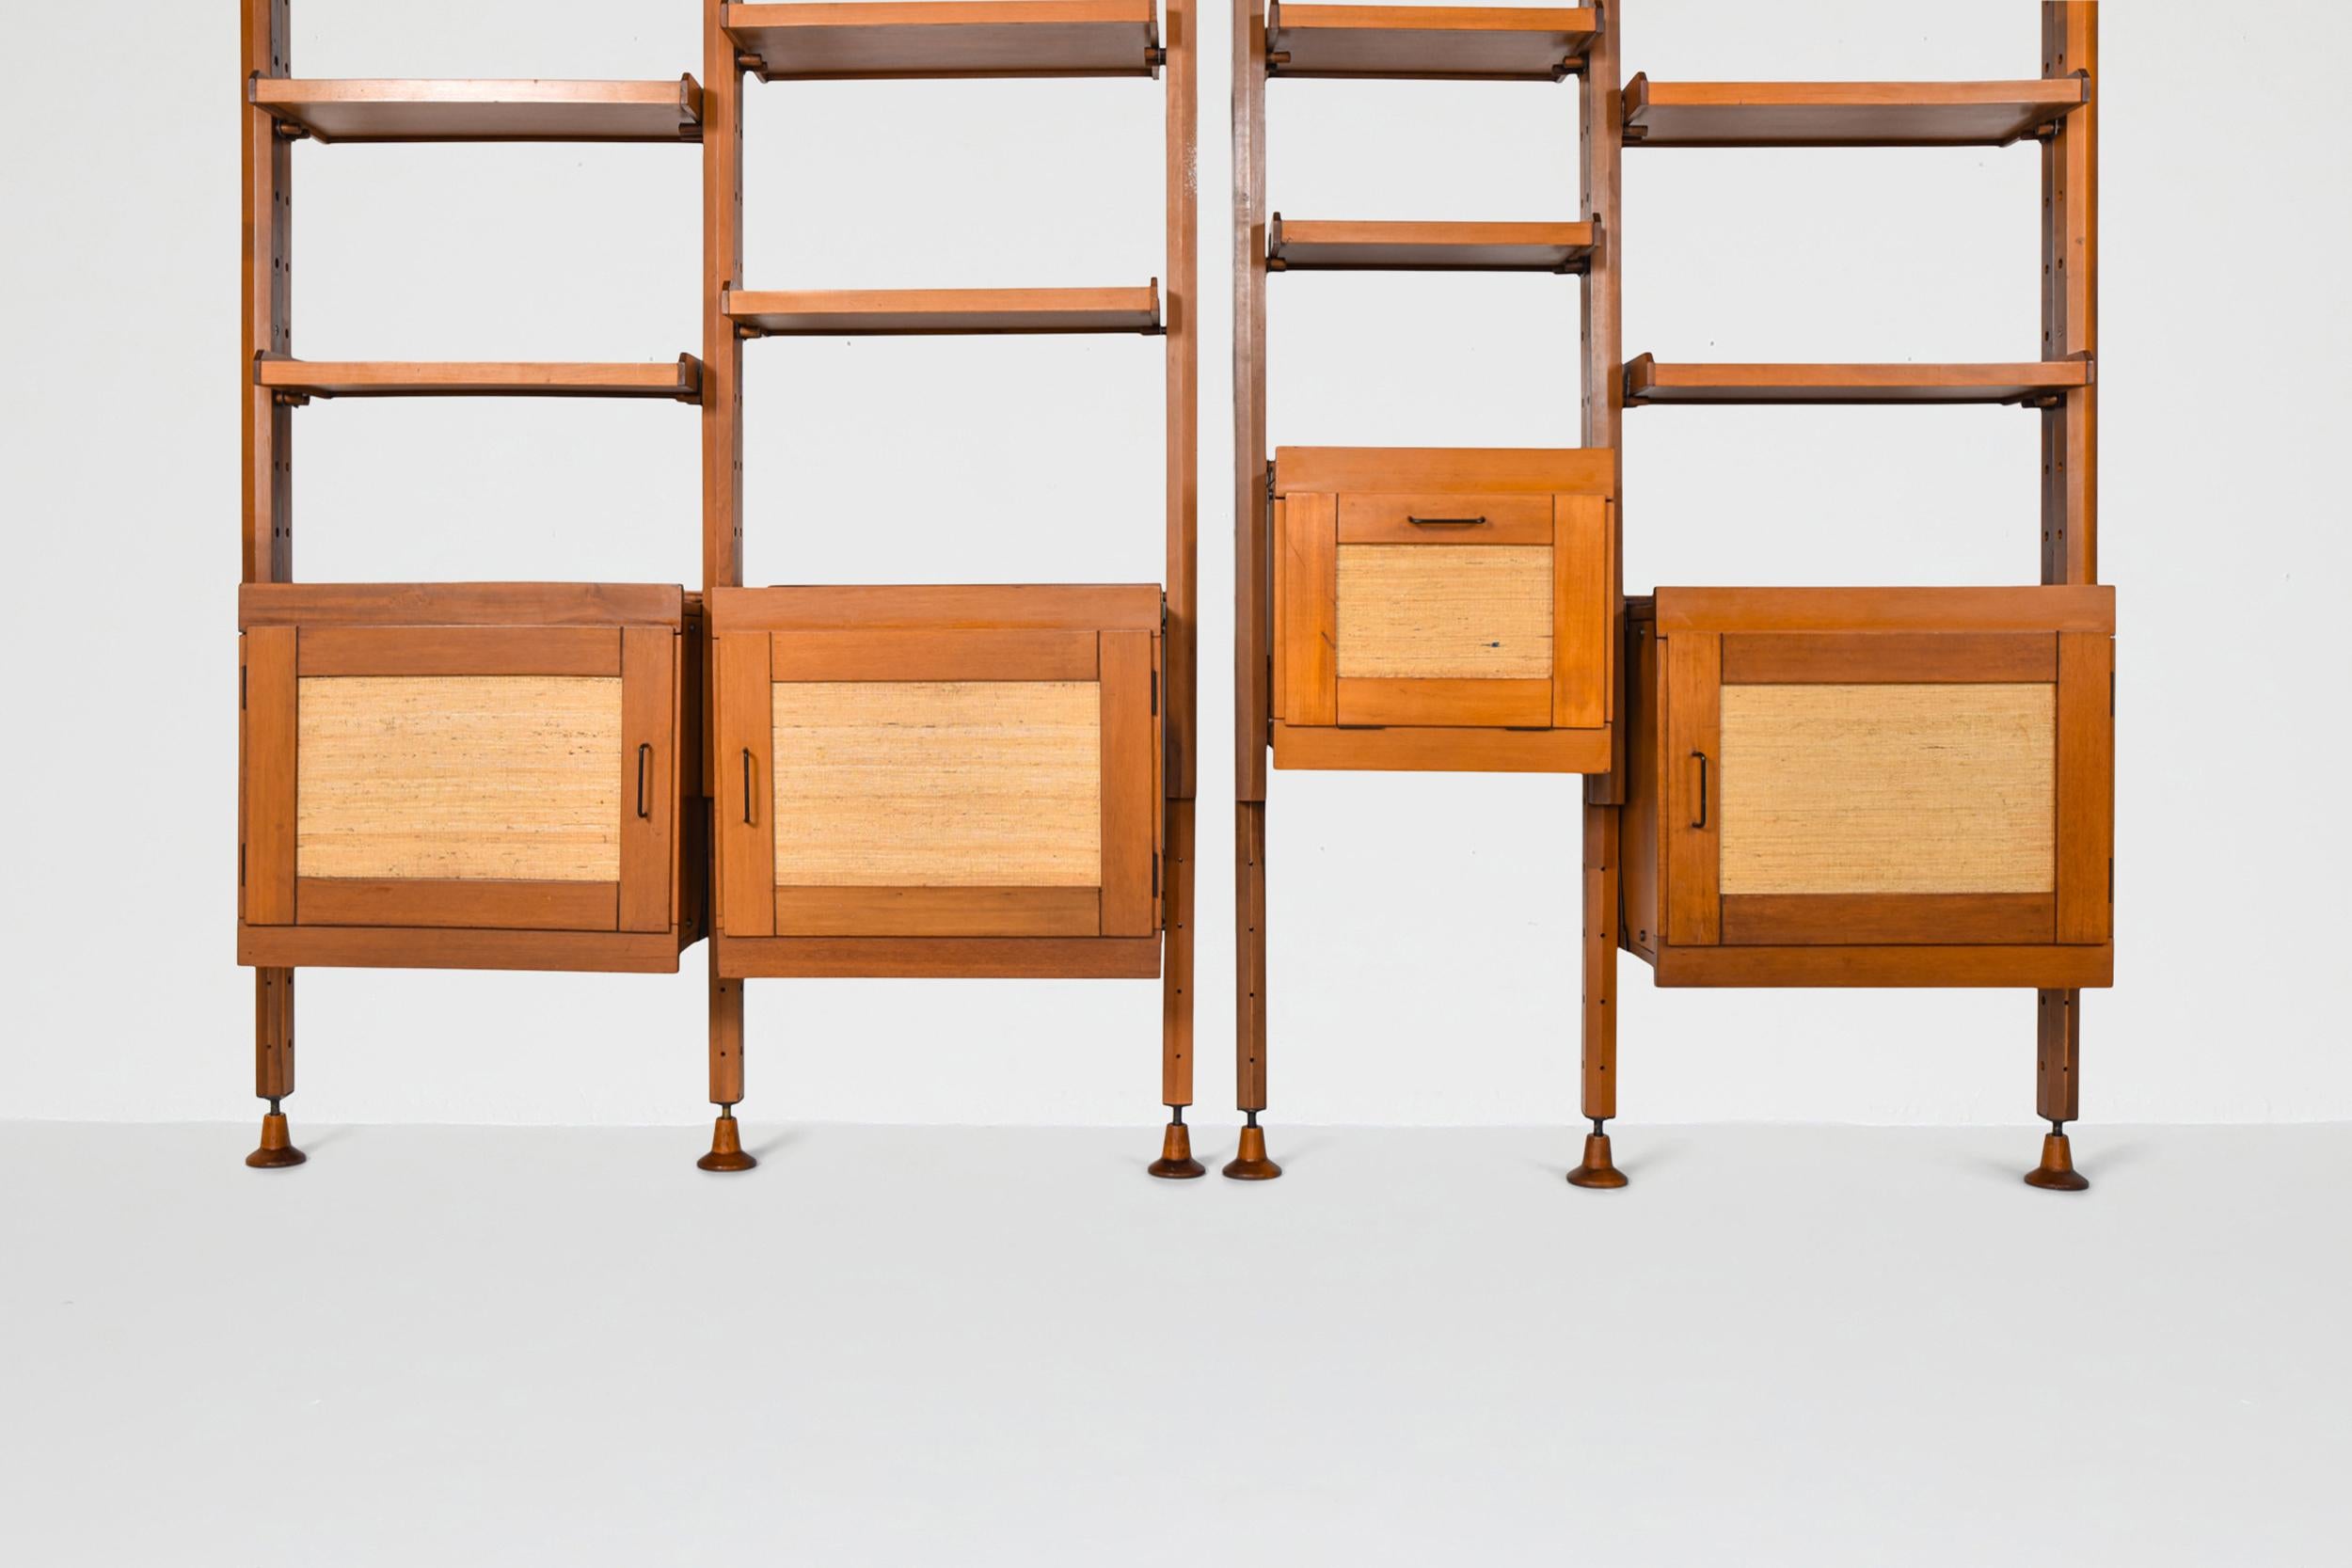 Mid-Century Modern shelves, brass, beech, teak, ISA Bergamo, Italy, 1960, Leonardo Fiori

Would fit well in a zen contemporary rustic modern interior, inspired by Wabi Sabi , Axel Vervoordt.

This wall-mounted shelving unit with adjustable